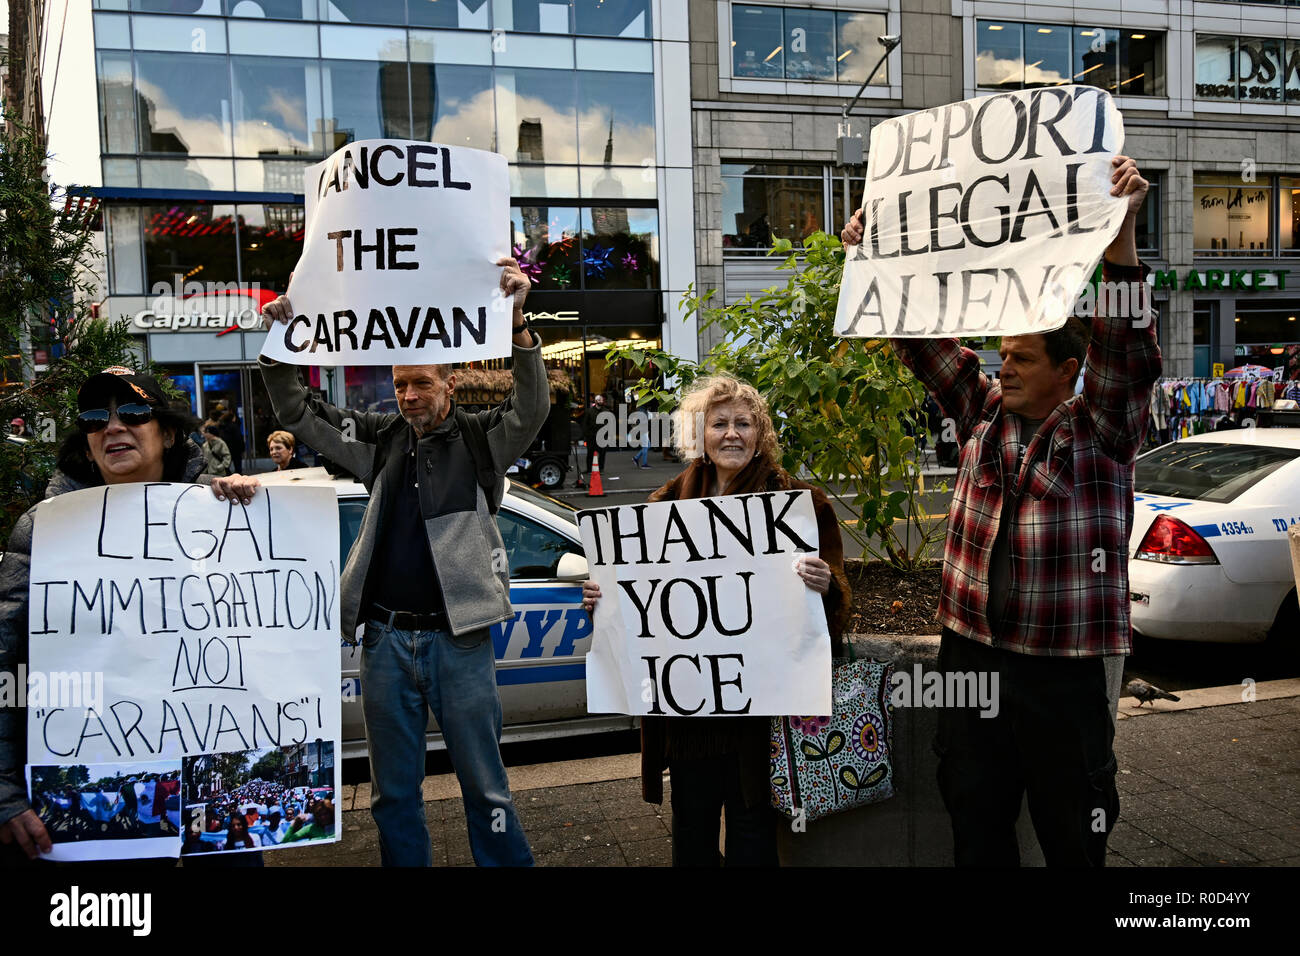 New York, U.S. 03 November 2018.  A small group of pro-Trump counter-demonstrators hold signs denouncing undocumented immigration as demonstrators protesting against Trump administration immigration policies rallied at Union Square.  The anti-Trump event, three days before the U.S. mid-term elections, was sponsored by several groups including NYC Democratic Socialists of America and the International Socialist Organization. Credit: Joseph Reid/Alamy Live News Stock Photo